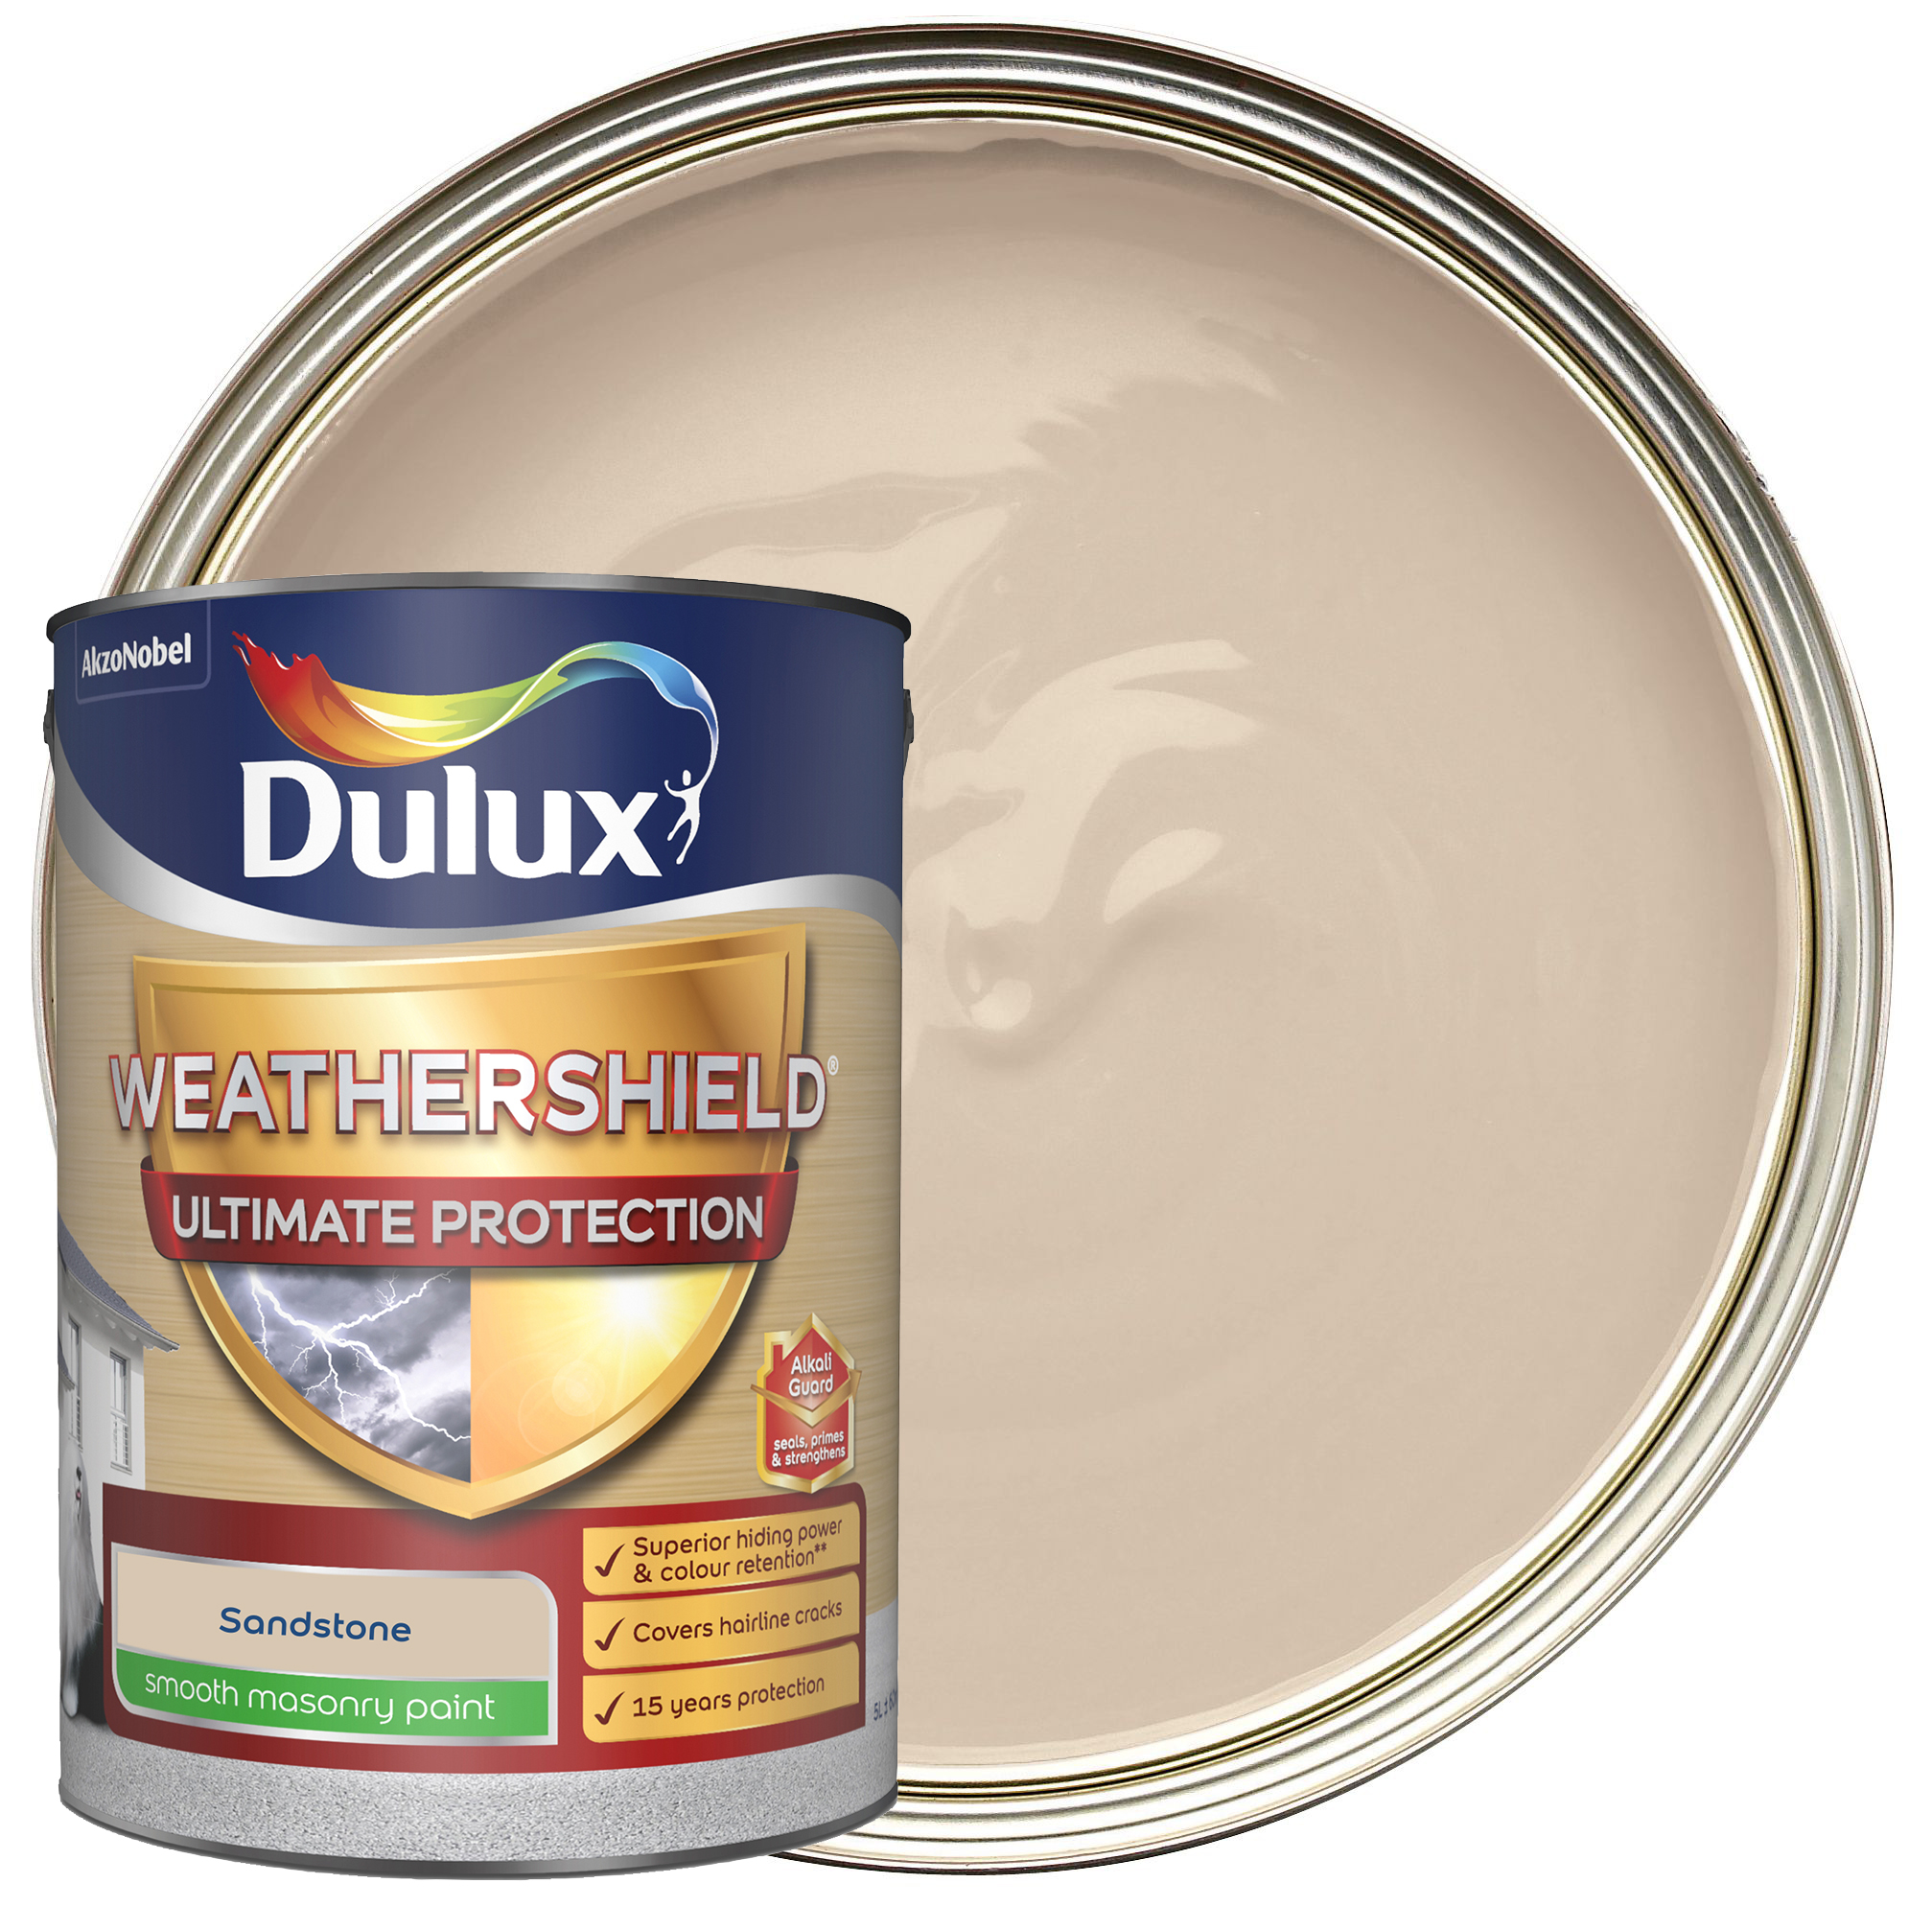 Image of Dulux Weathershield Ultimate Protect Paint - Sandstone - 5L